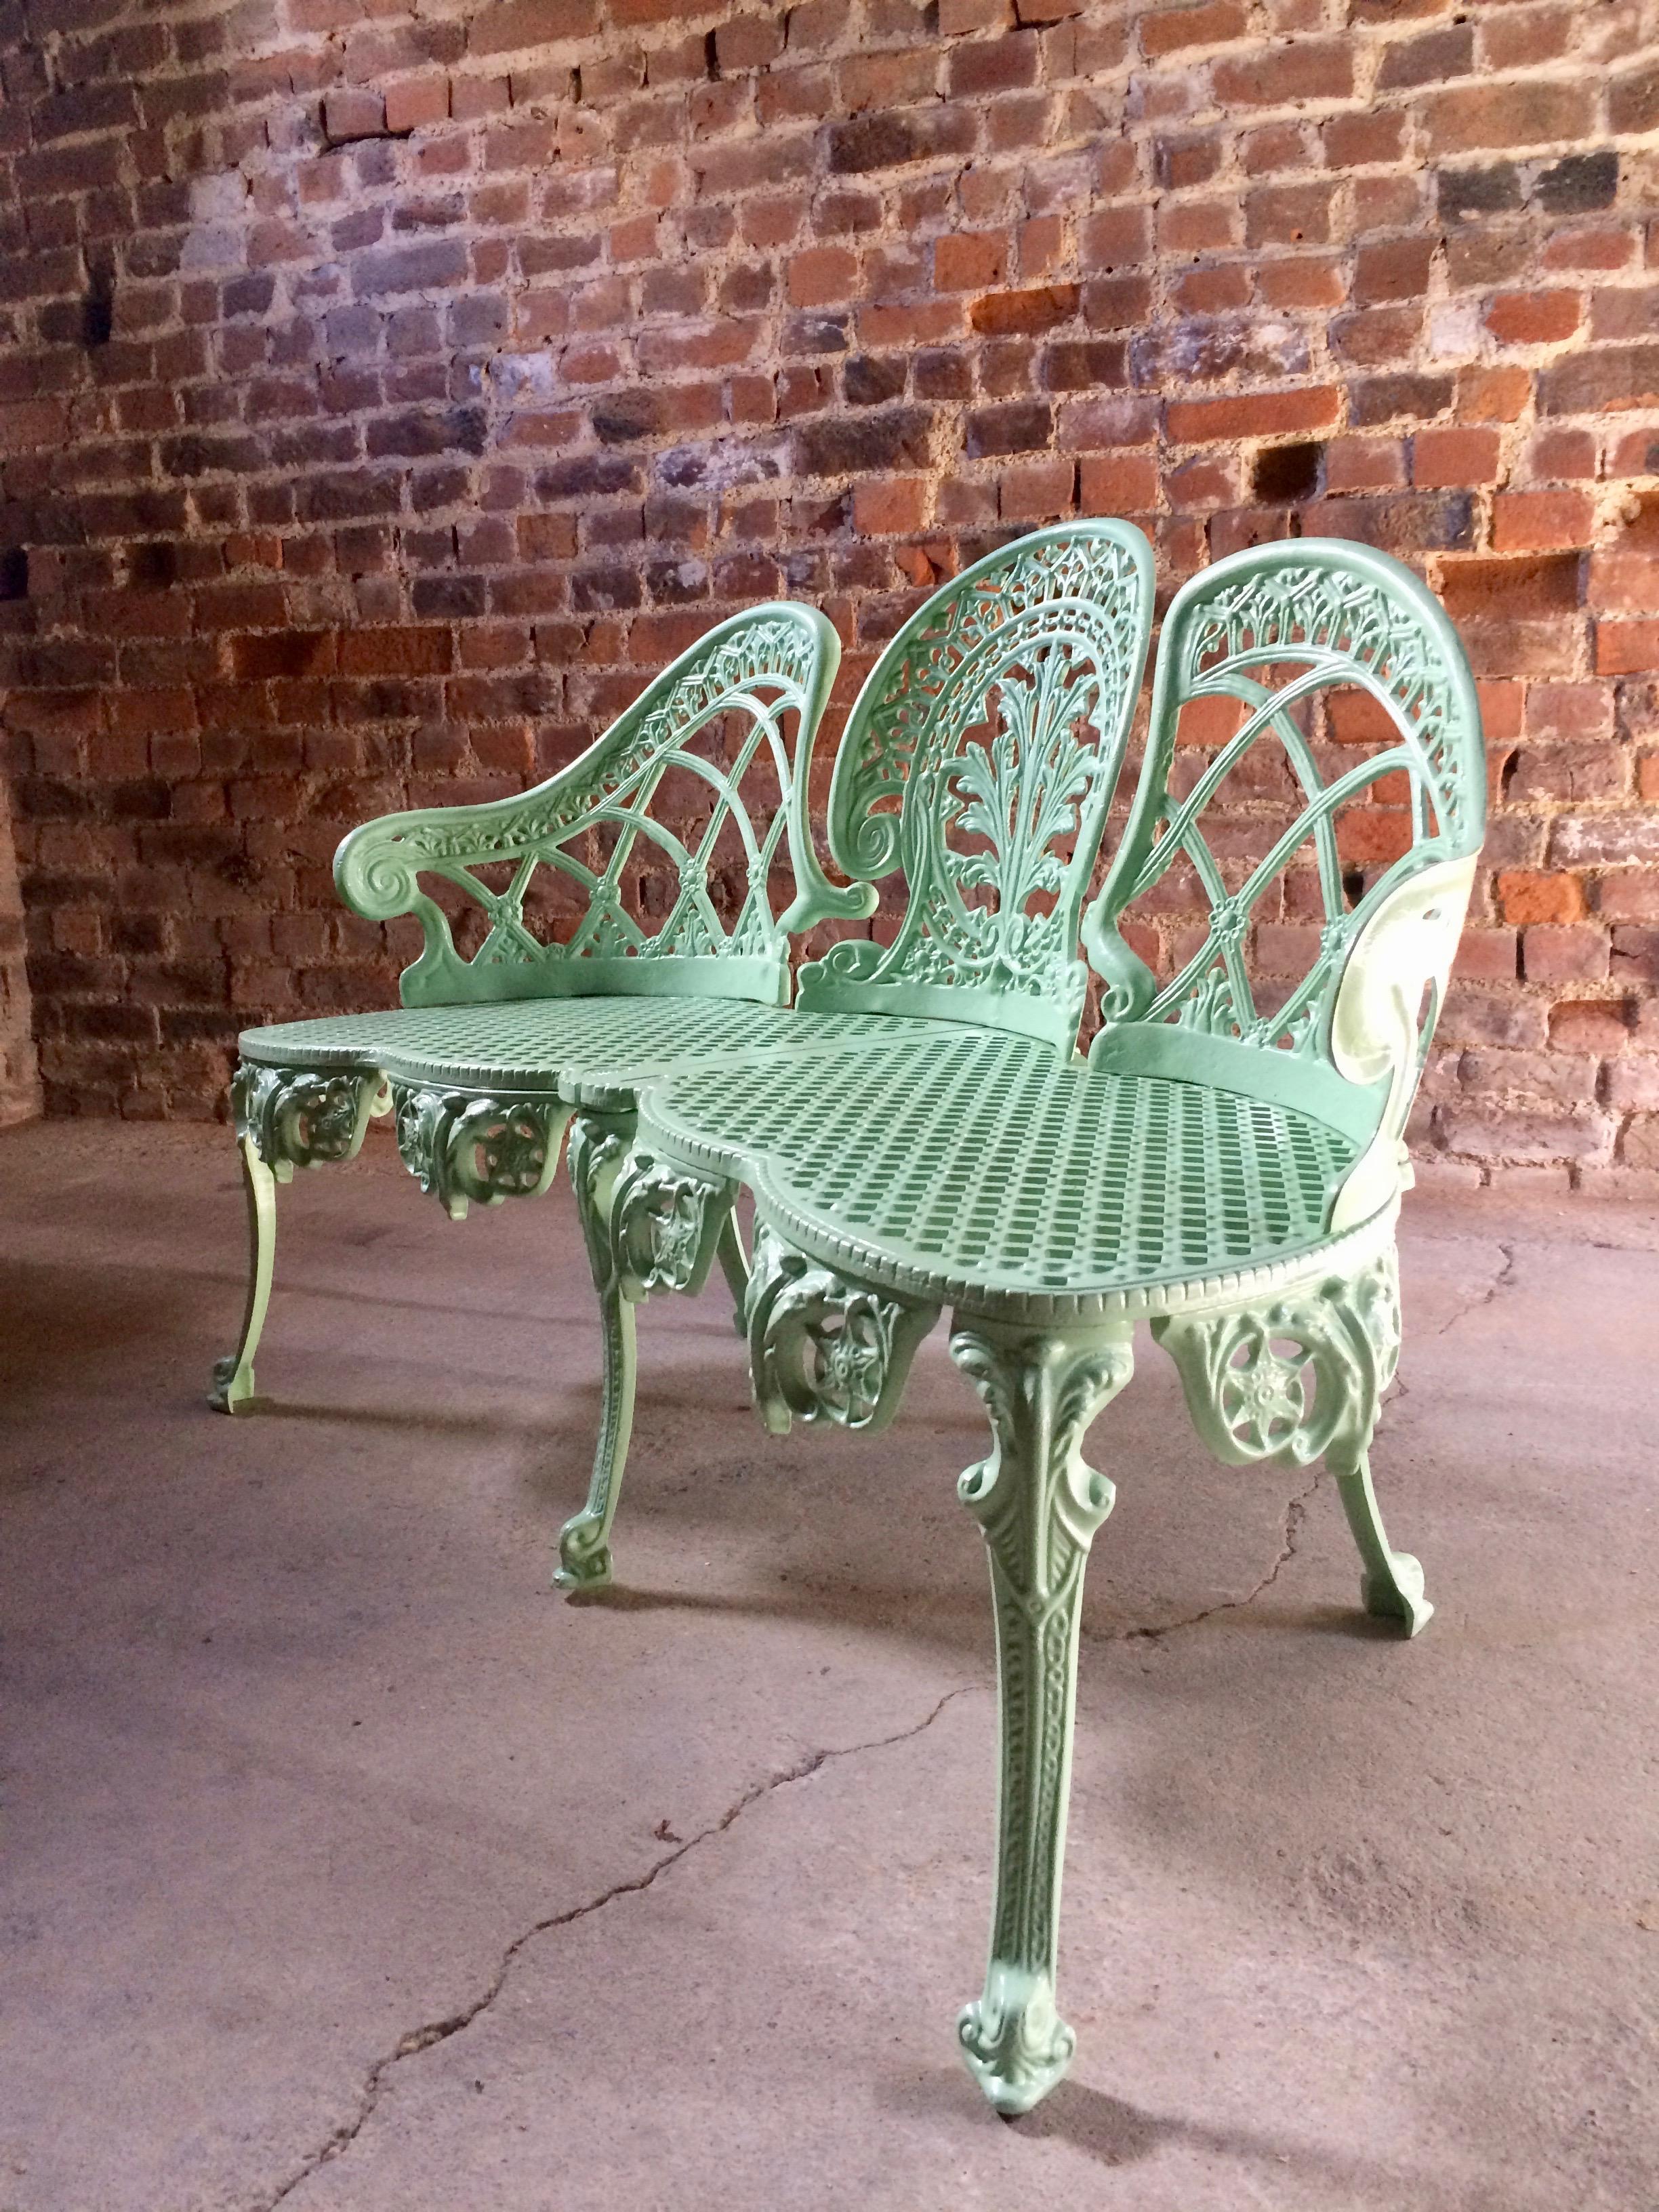 A fabulous original vintage French cast iron garden bench in the Victorian manner, circa 1960s, finished in pistachio green having been newly shot blasted and powder coated, looks stunning.

French
Victorian style
Cast iron
Garden bench
Newly